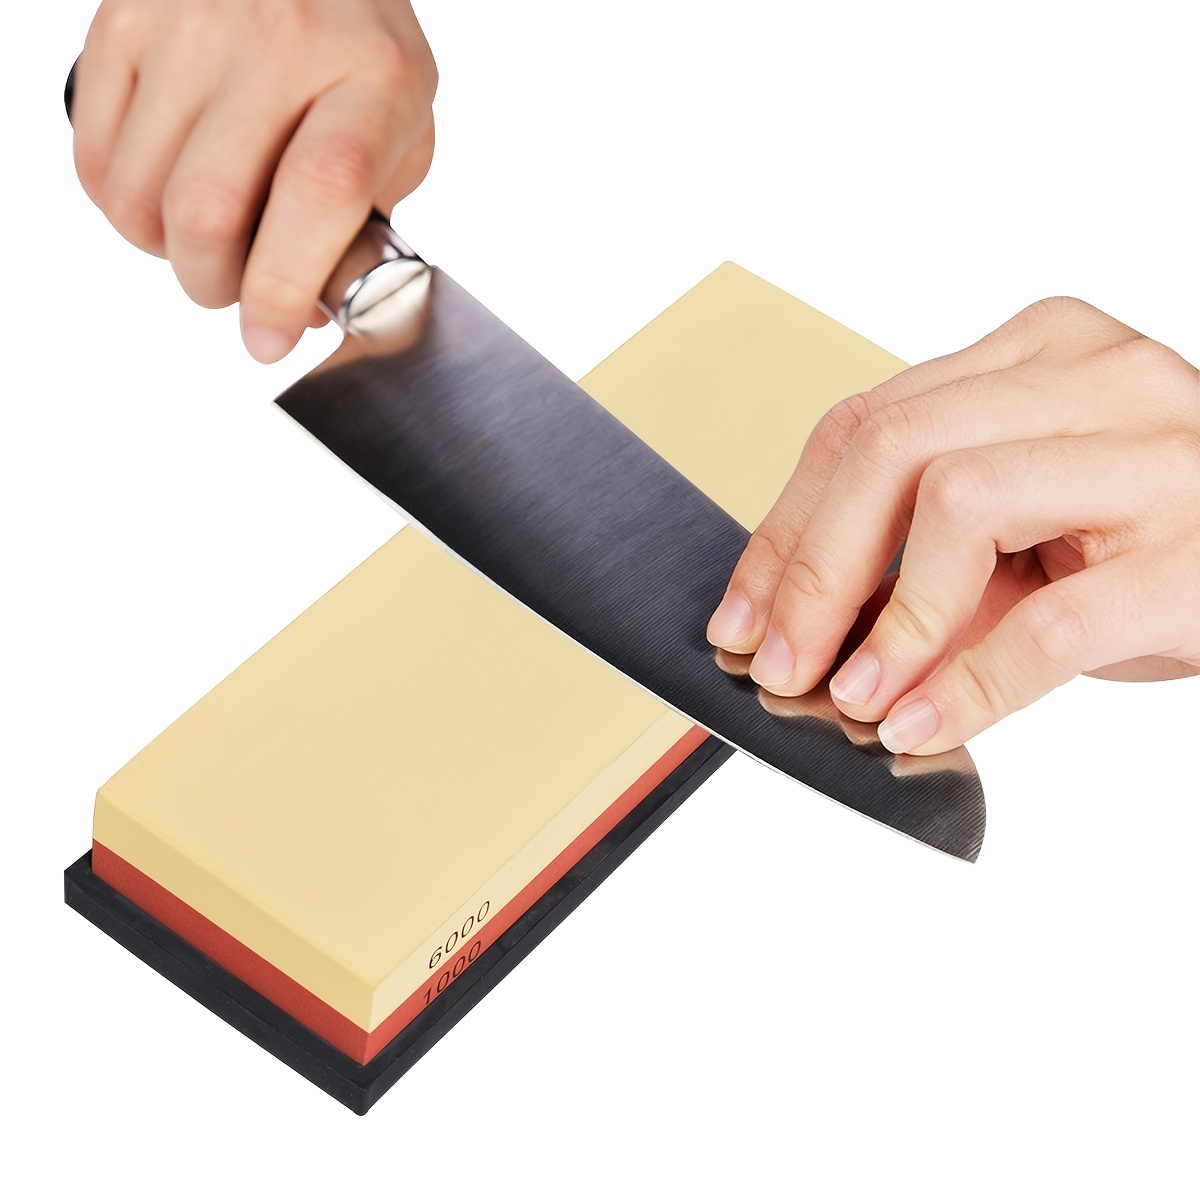 Knife Dual Sided 1000 & 6000 Grit Stone-Sharpener Dull Blades